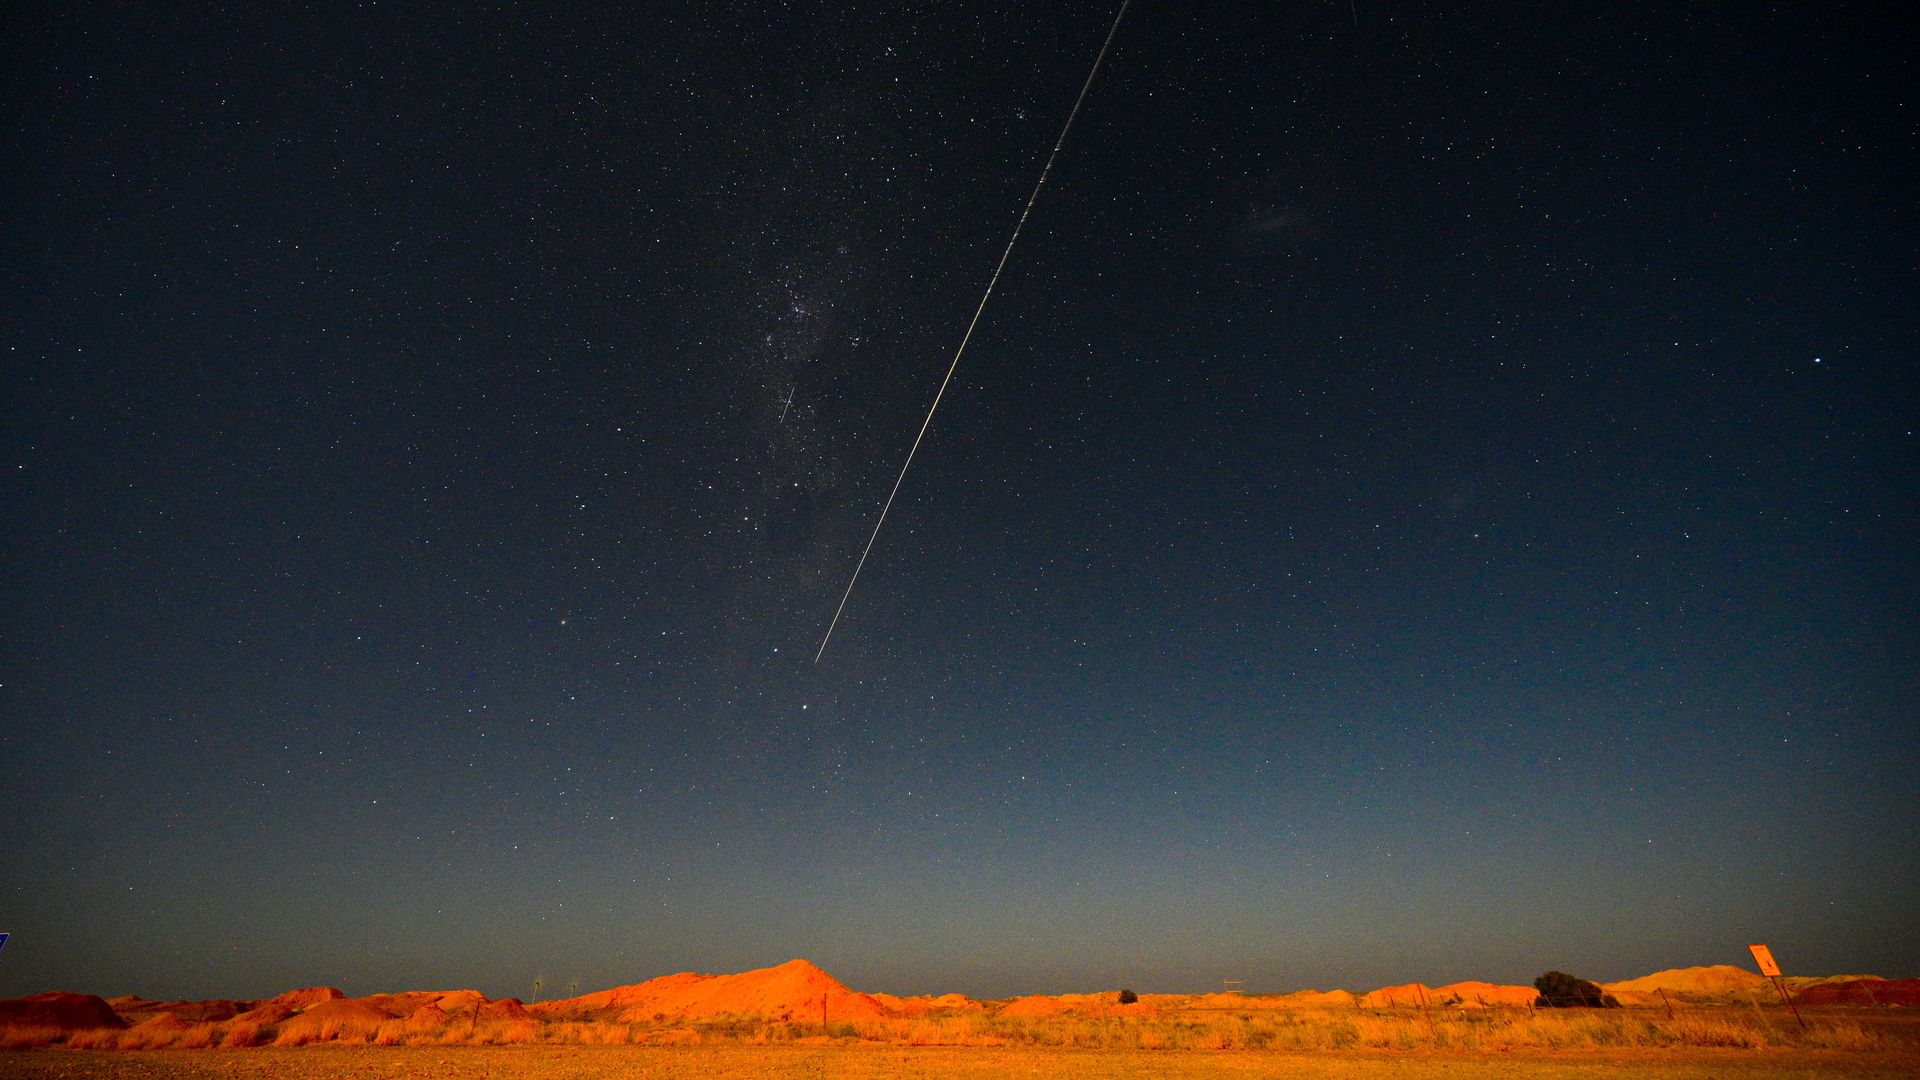 JAXA's Hayabusa-2 probe's sample drop to earth after landing on and gathering material from an asteroid some 300 million kilometres from Earth is seen from Coober Pedy in South Australia on